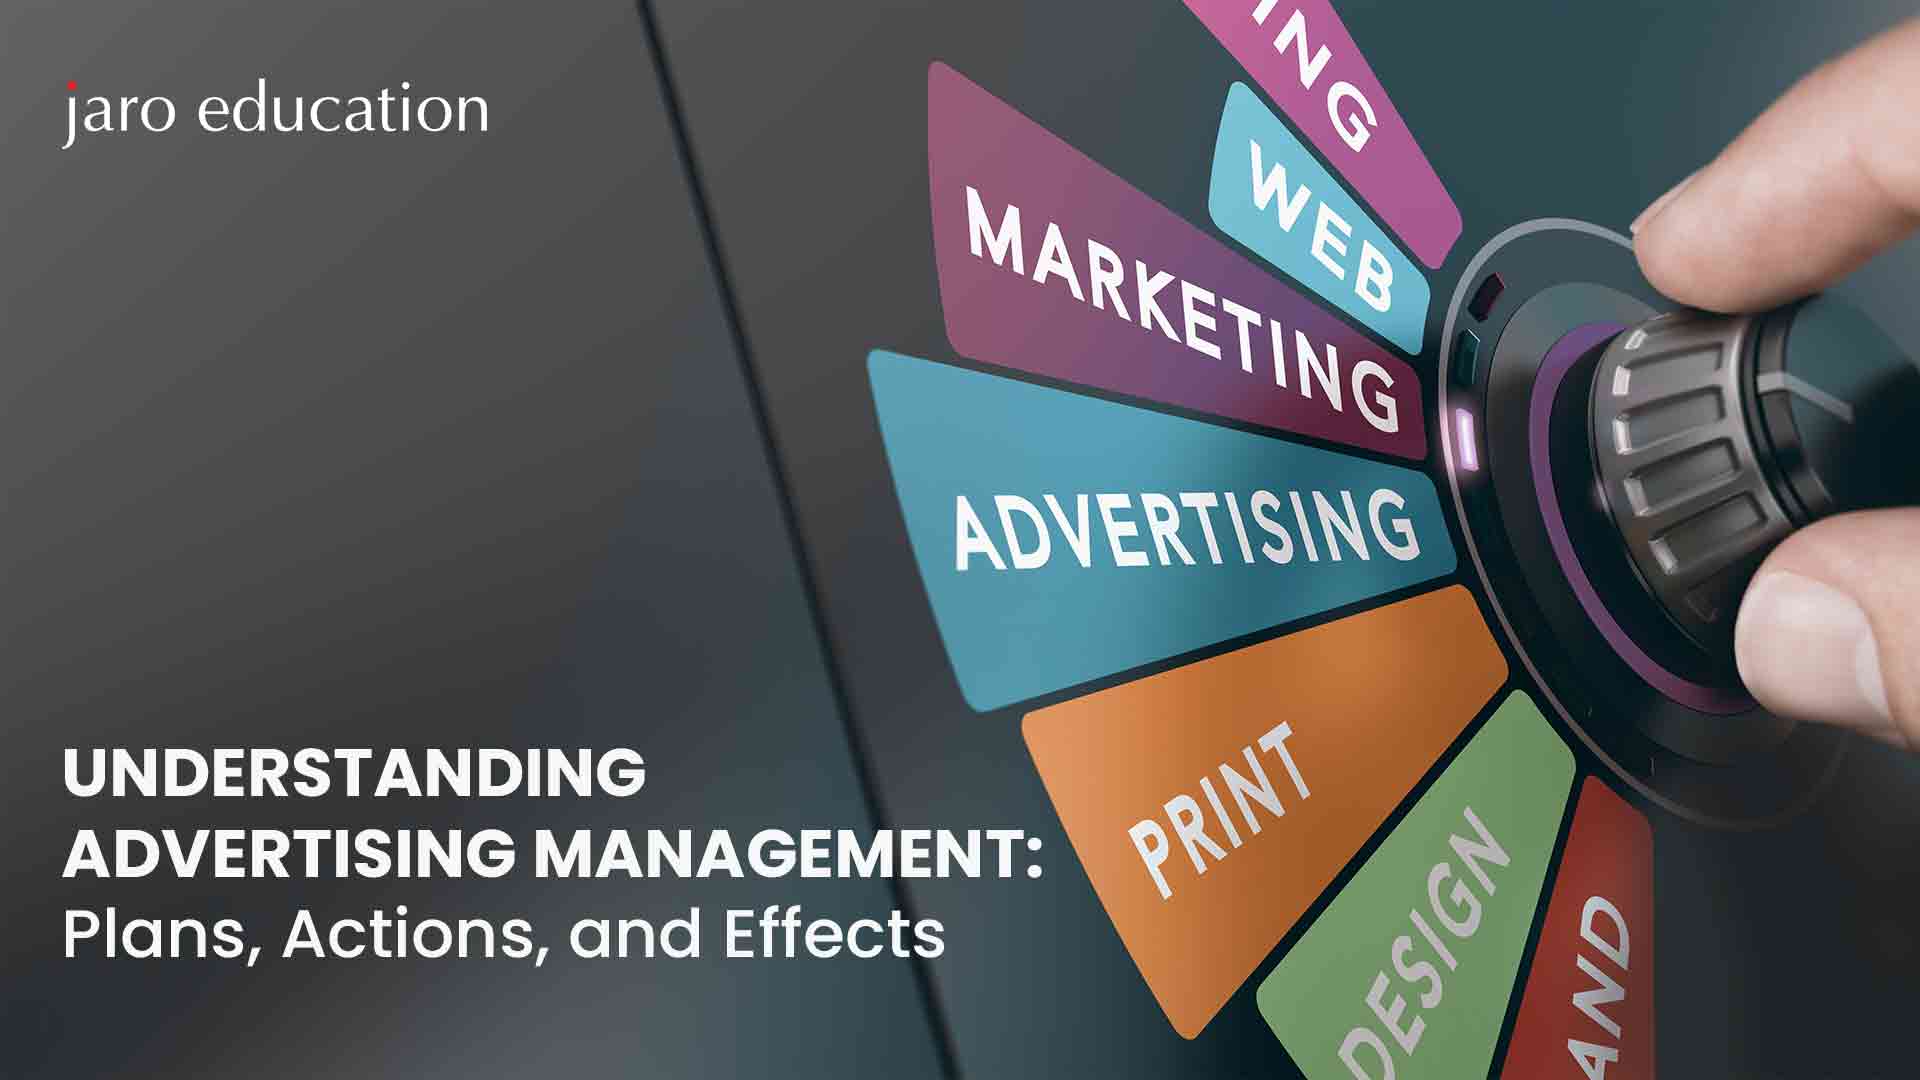 Understanding Advertising Management Plans, Actions, and Effects